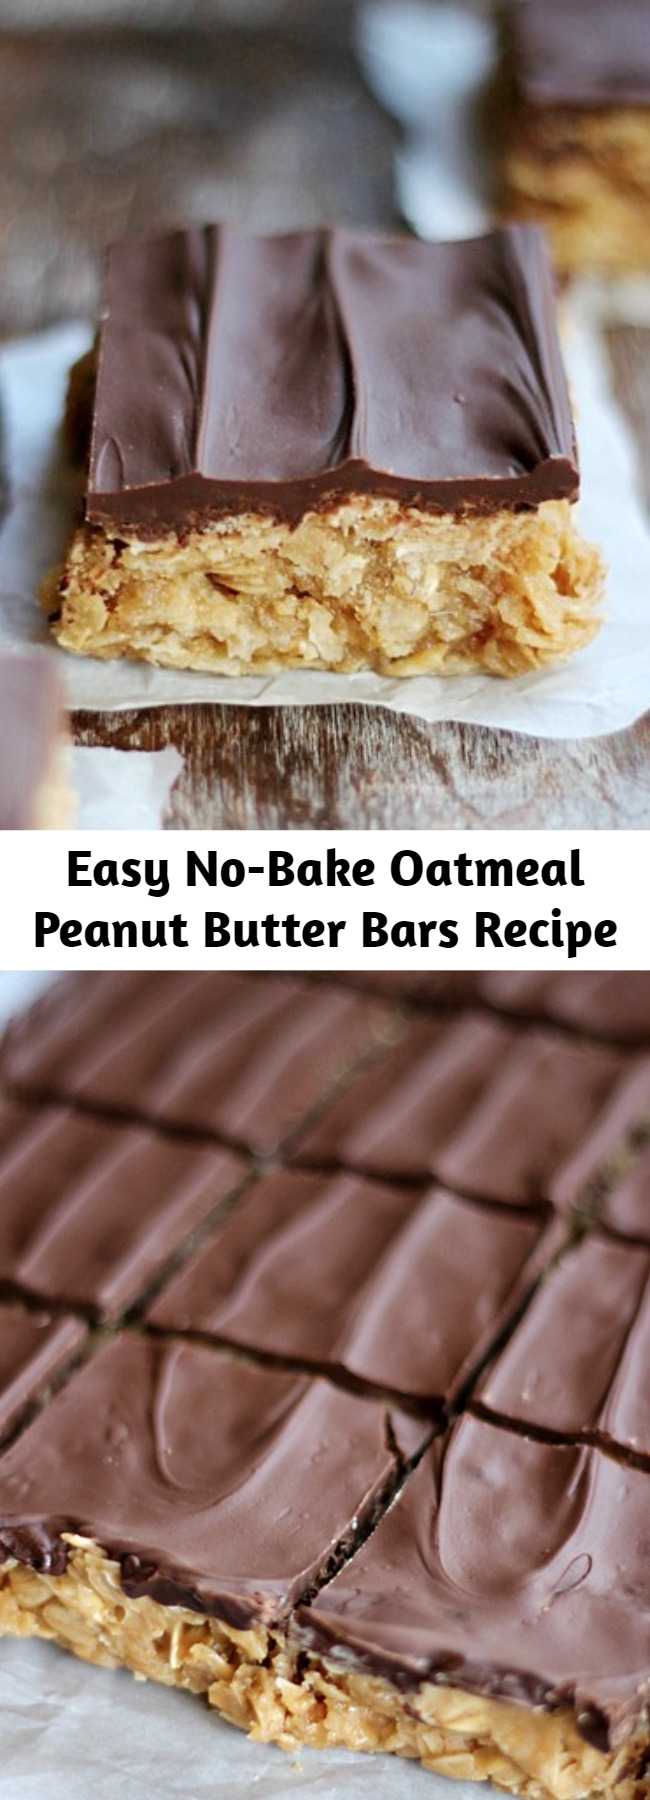 Easy No-Bake Oatmeal Peanut Butter Bars Recipe - Creamy peanut butter intertwining with oats, blanketed with melted chocolate and cut into bite size squares! You’ll love how easy and scrumptious these No Bake Oatmeal Peanut Butter Bars are! #NoBakeBars